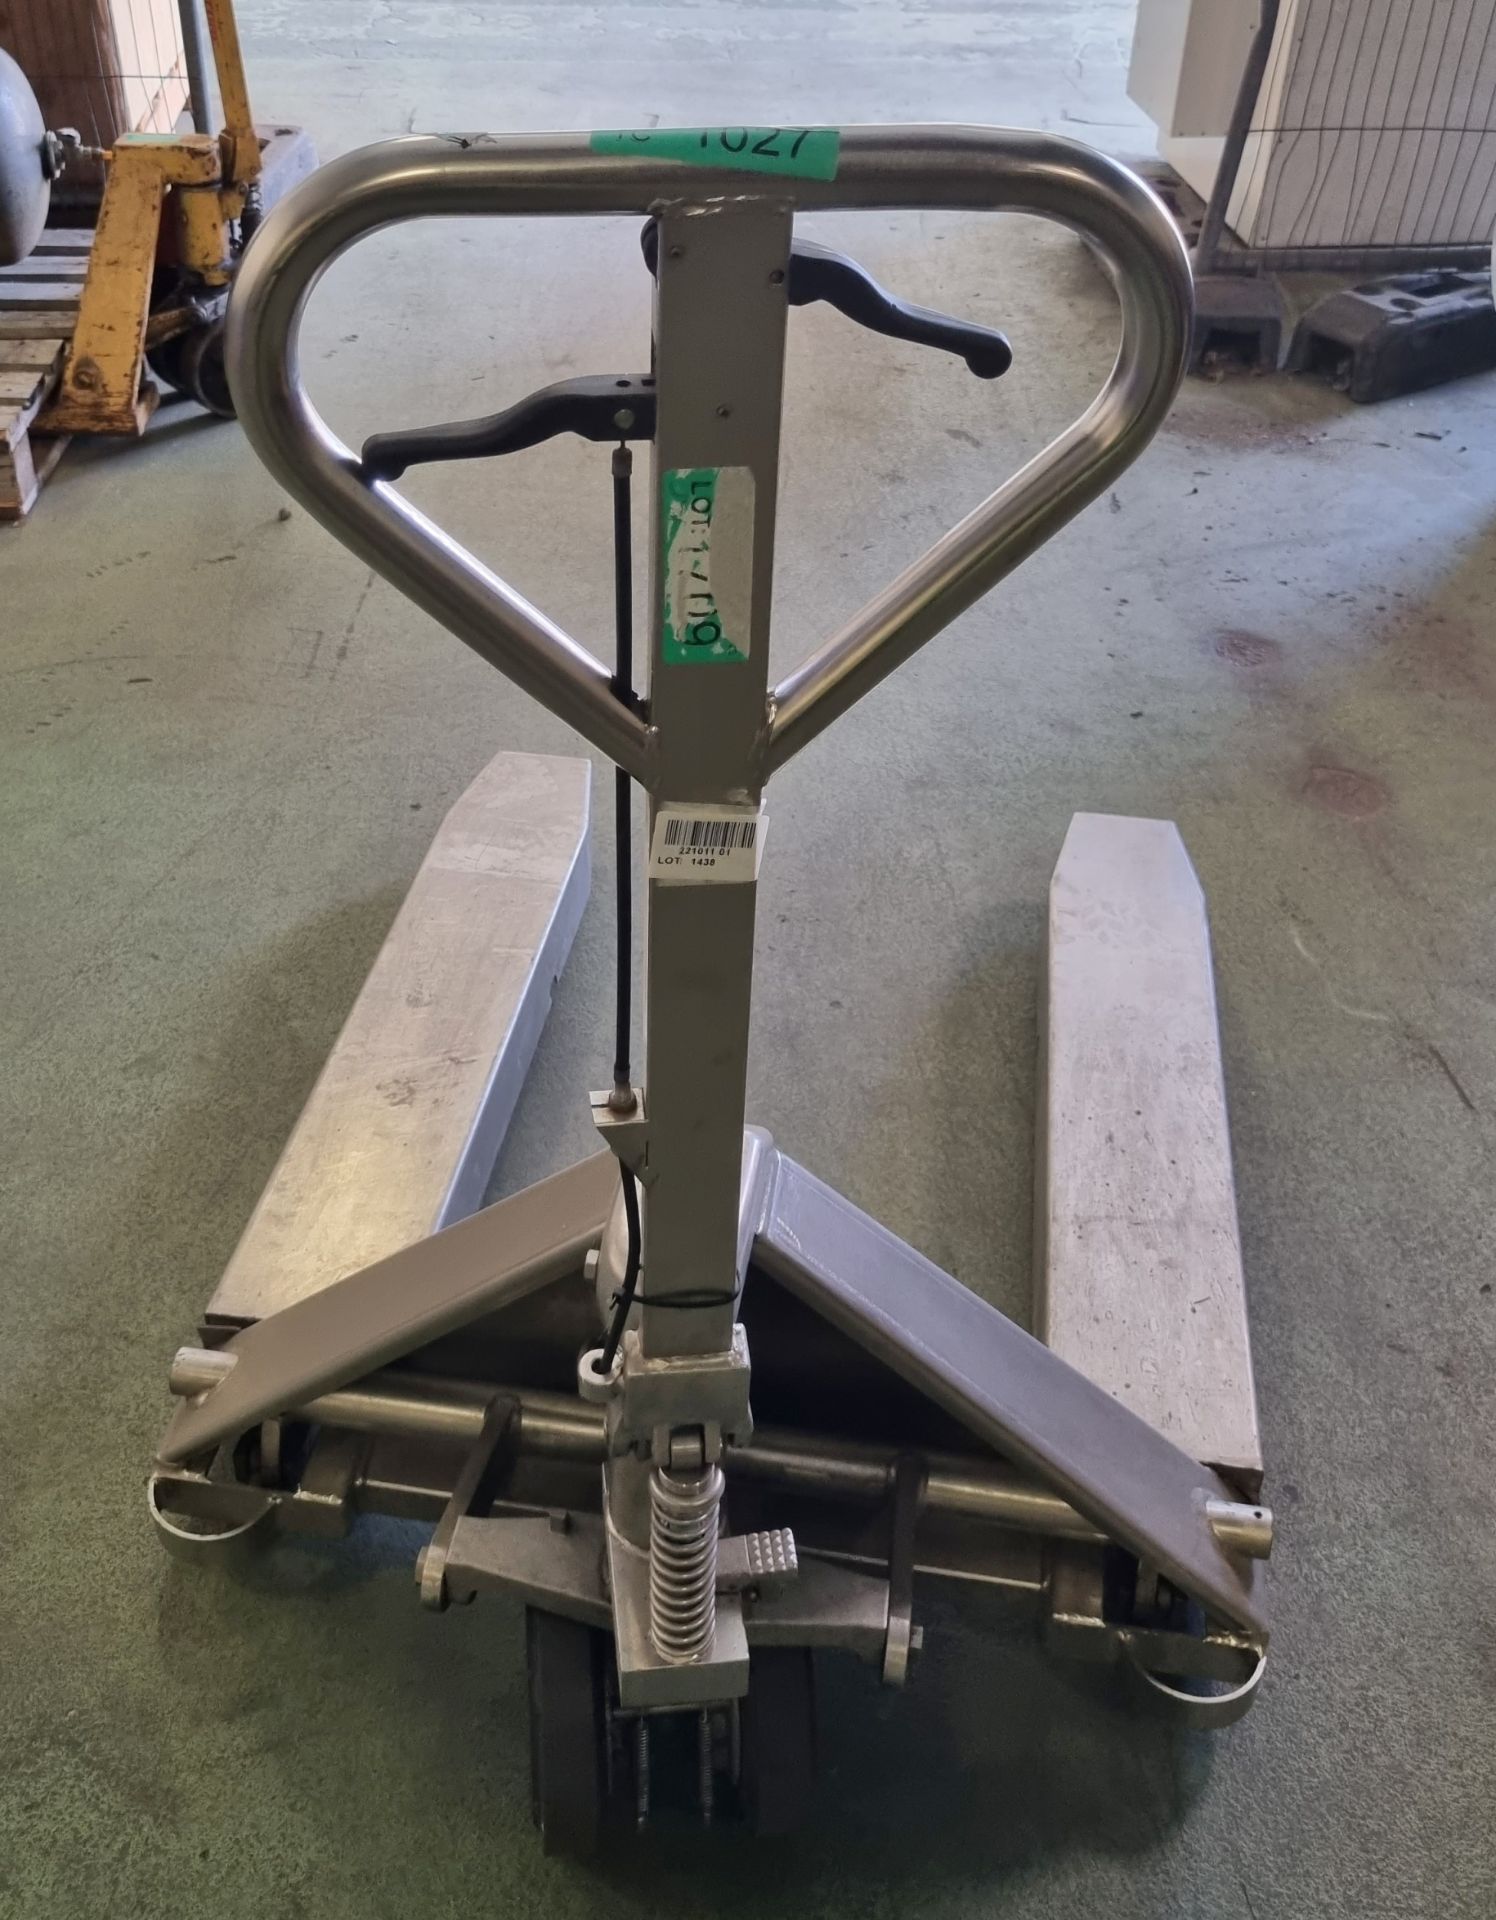 Stainless steel pallet truck with removable fork height extensions Carreffe TX L2 - 2000kg - Image 3 of 3